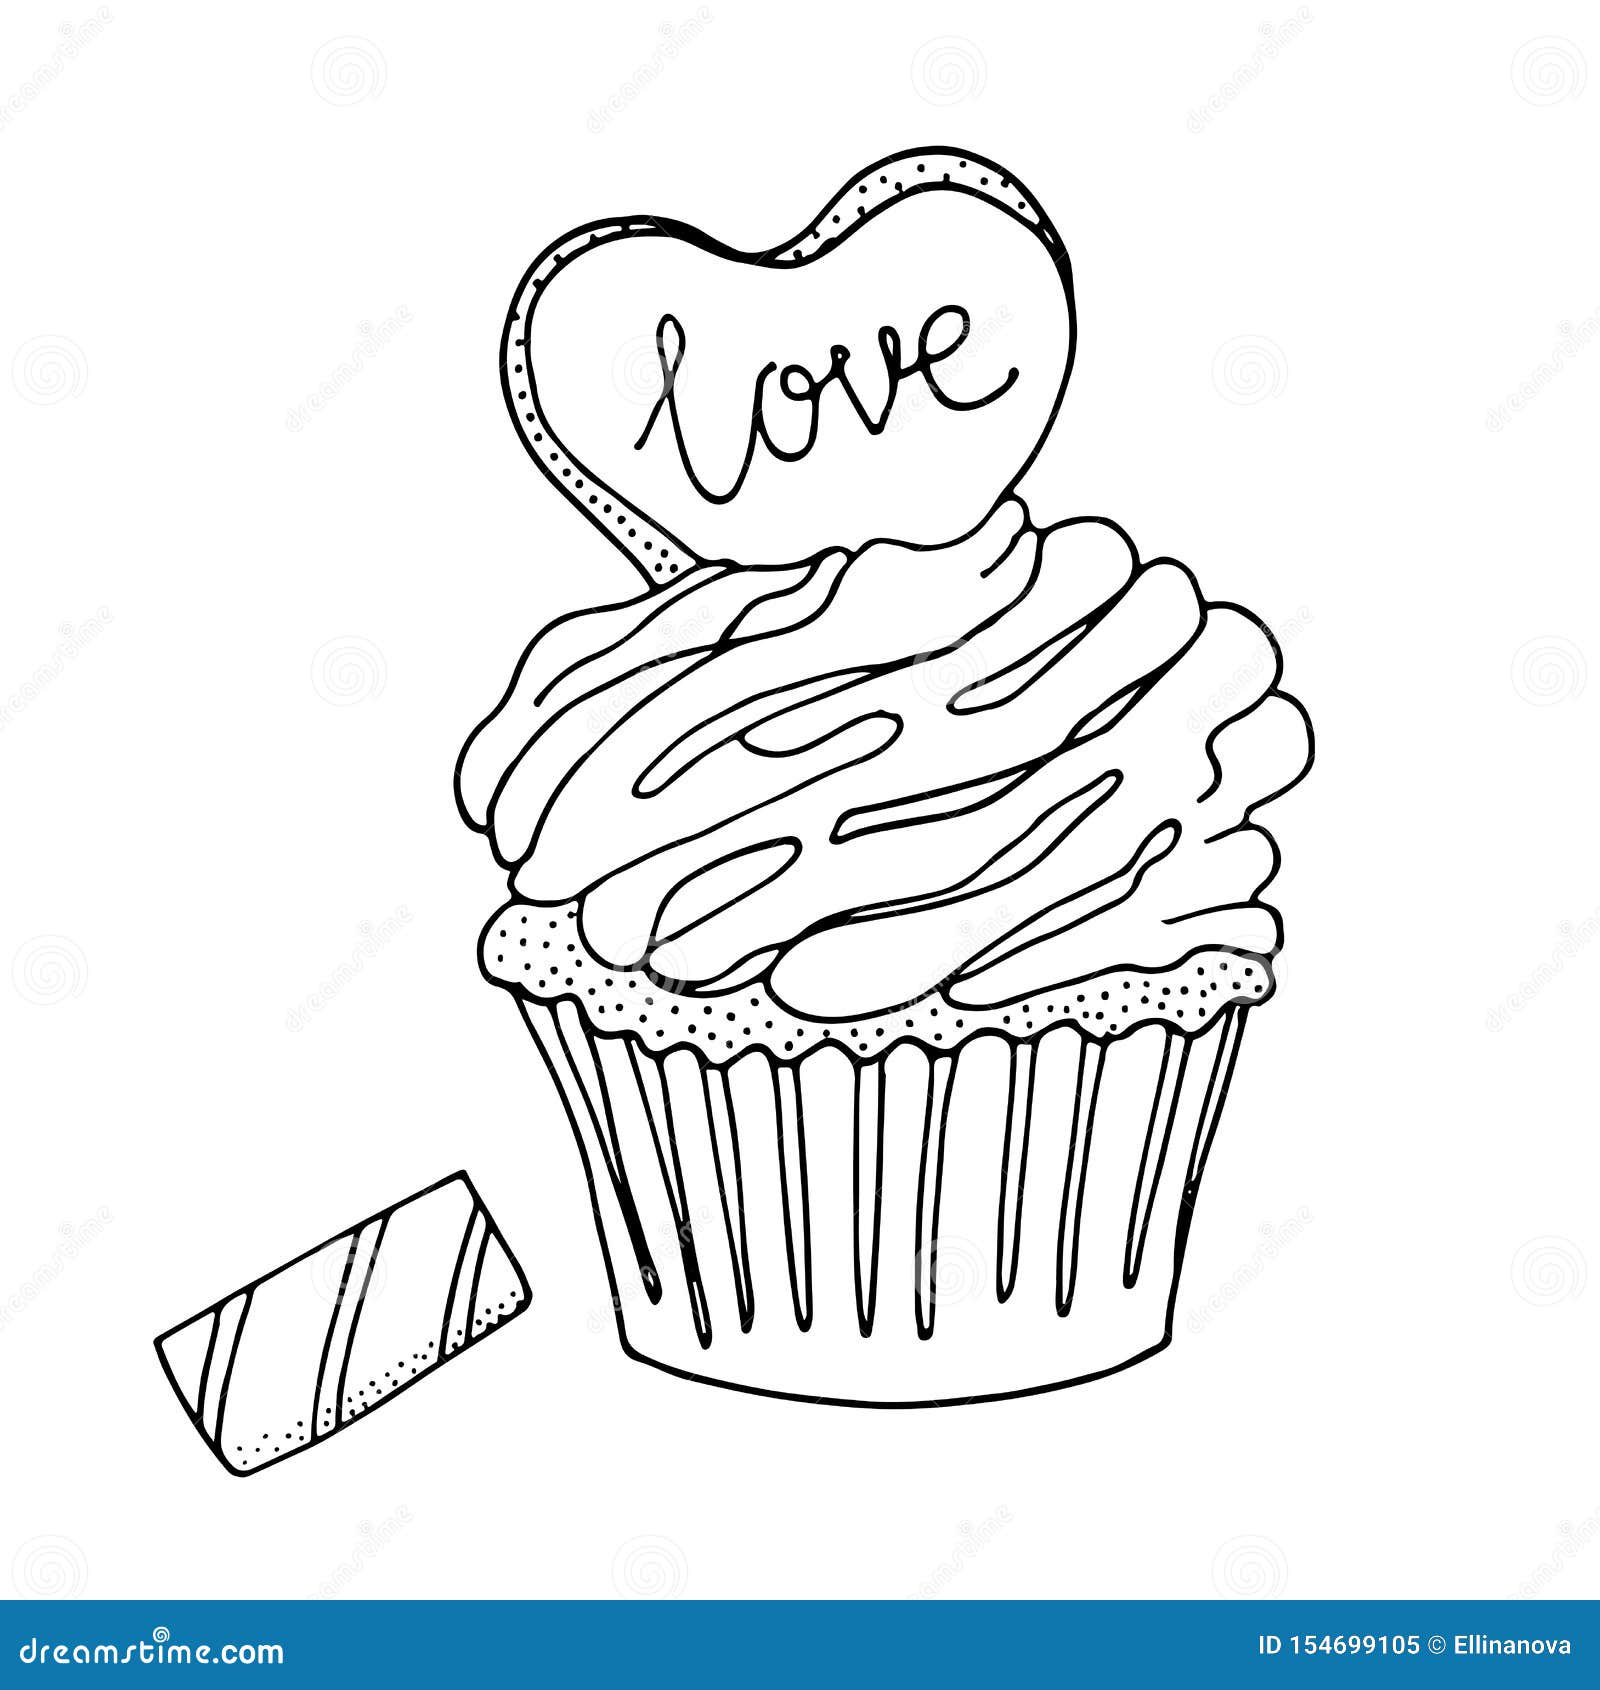 sweet dessert for coloring book or page stock vector